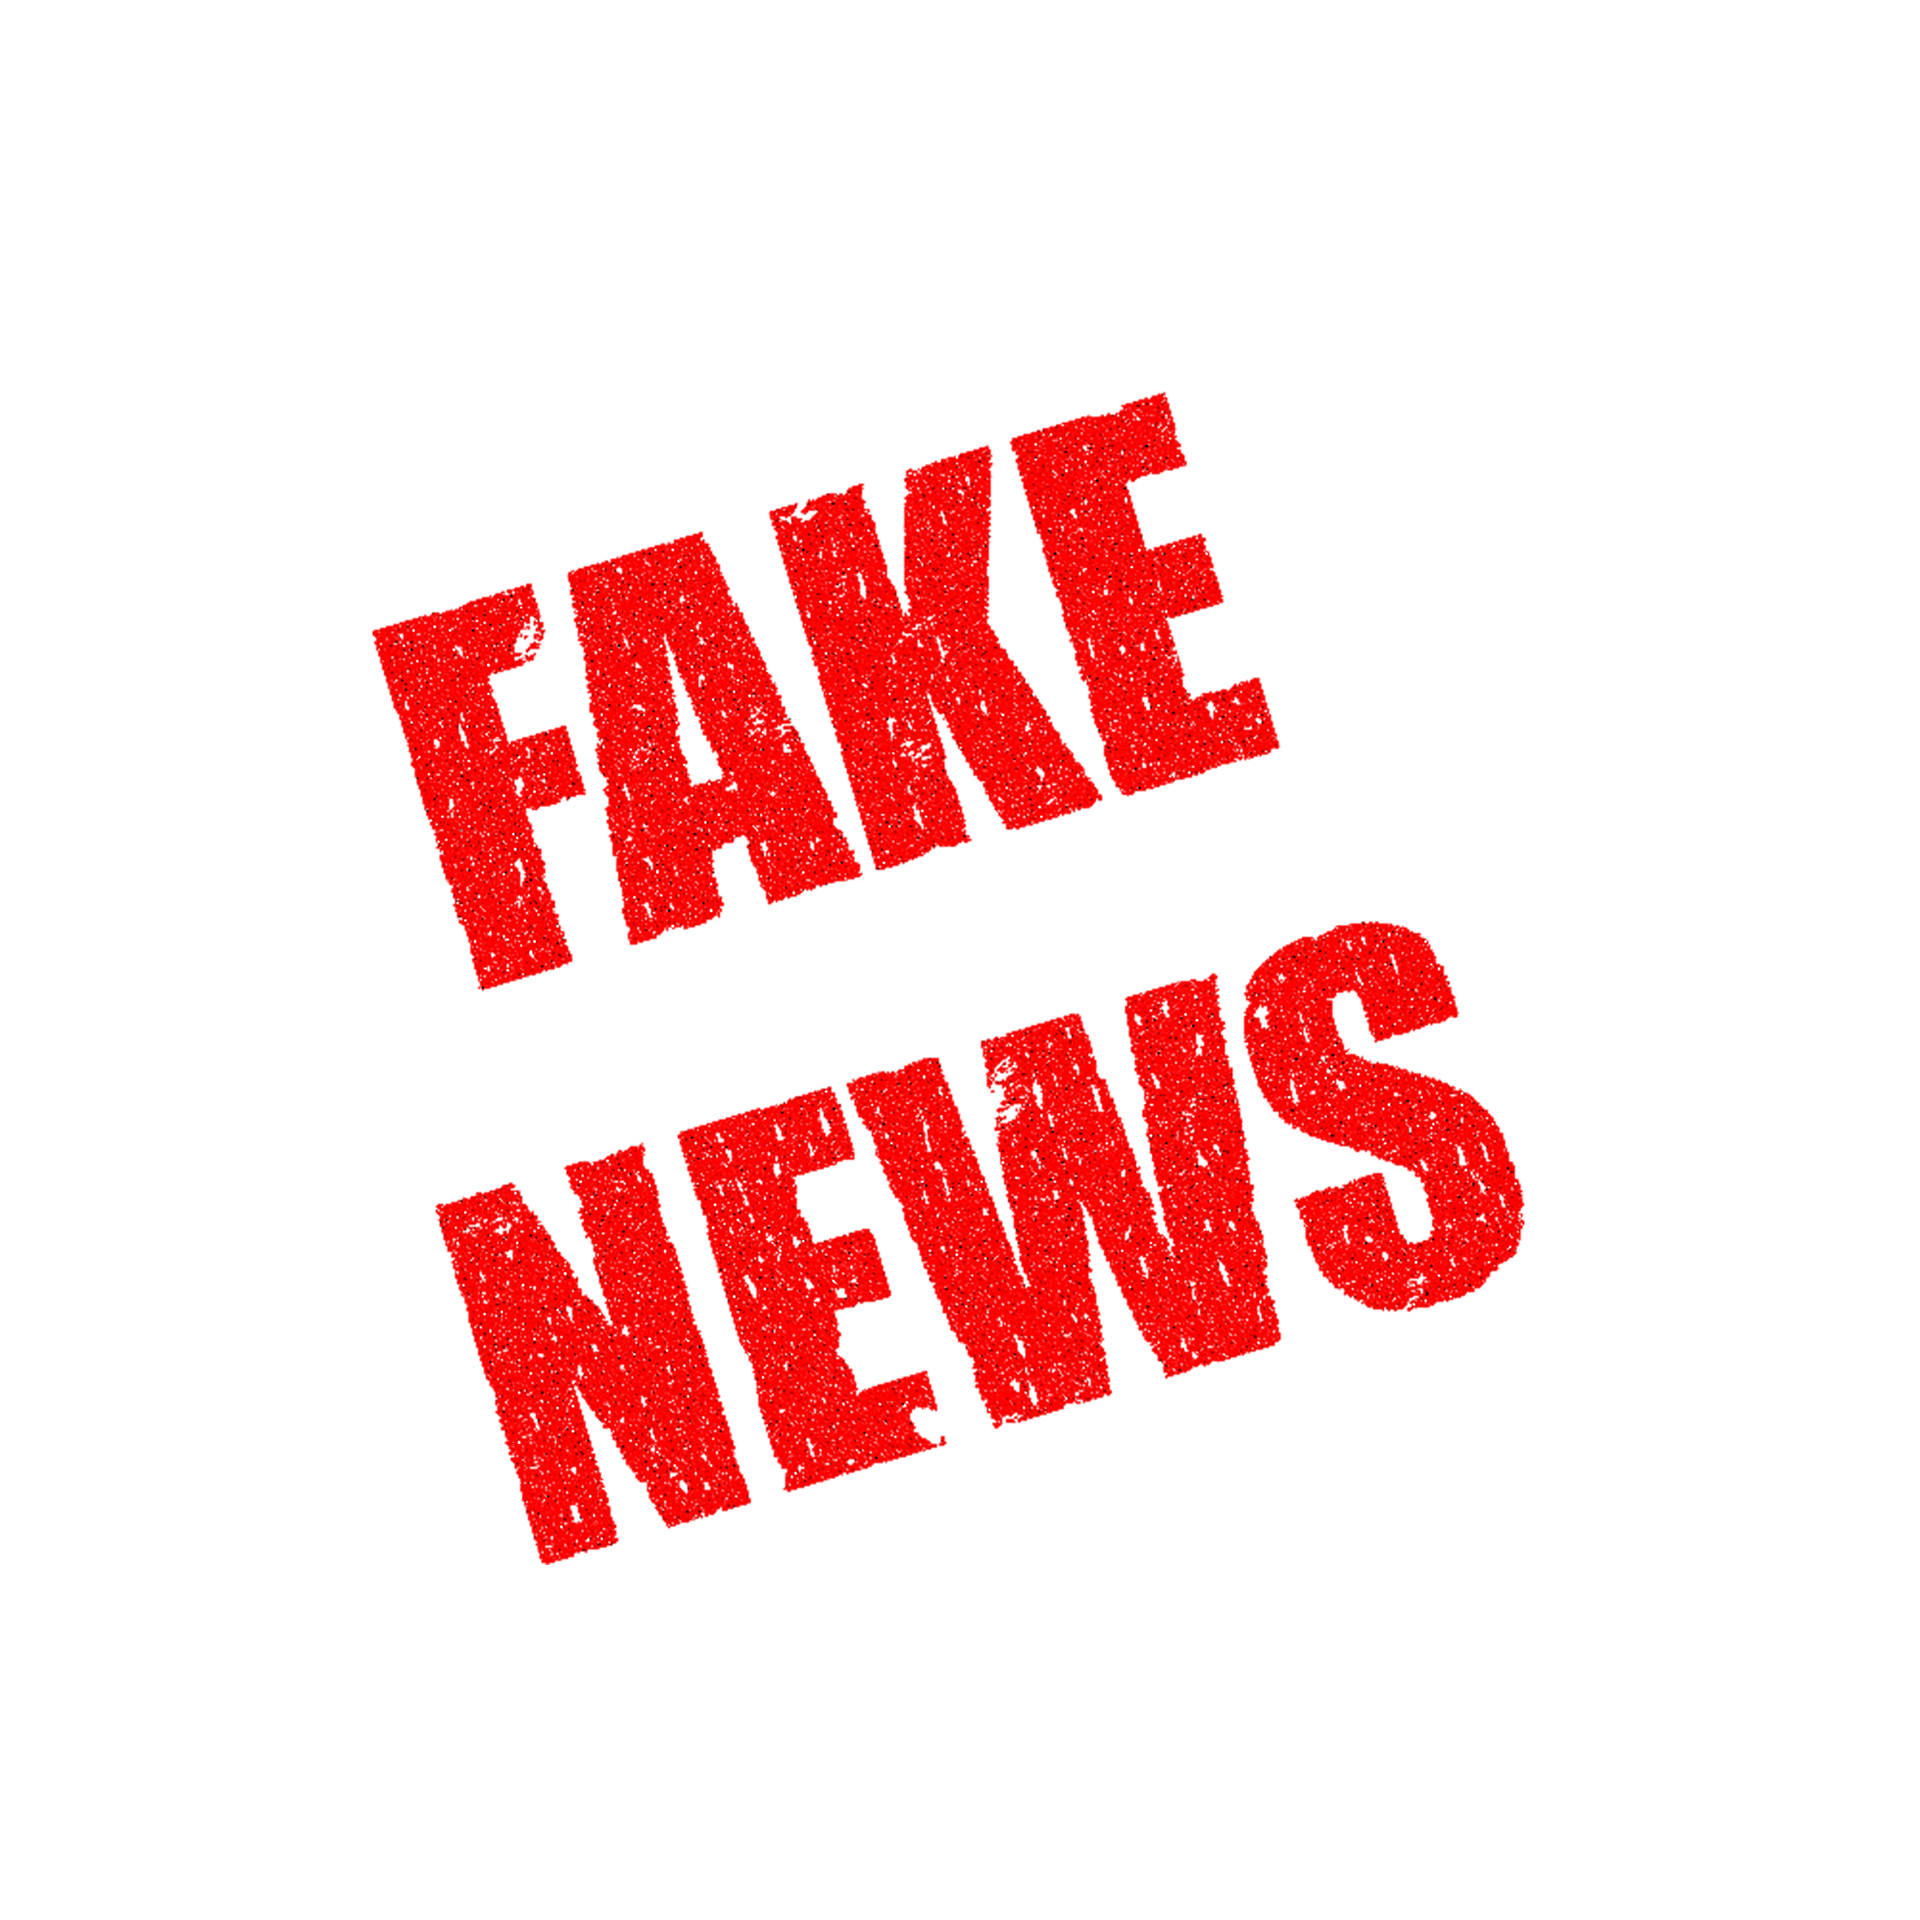 Download Free News Brand Media Text Fake PNG Image High Quality ICON ...